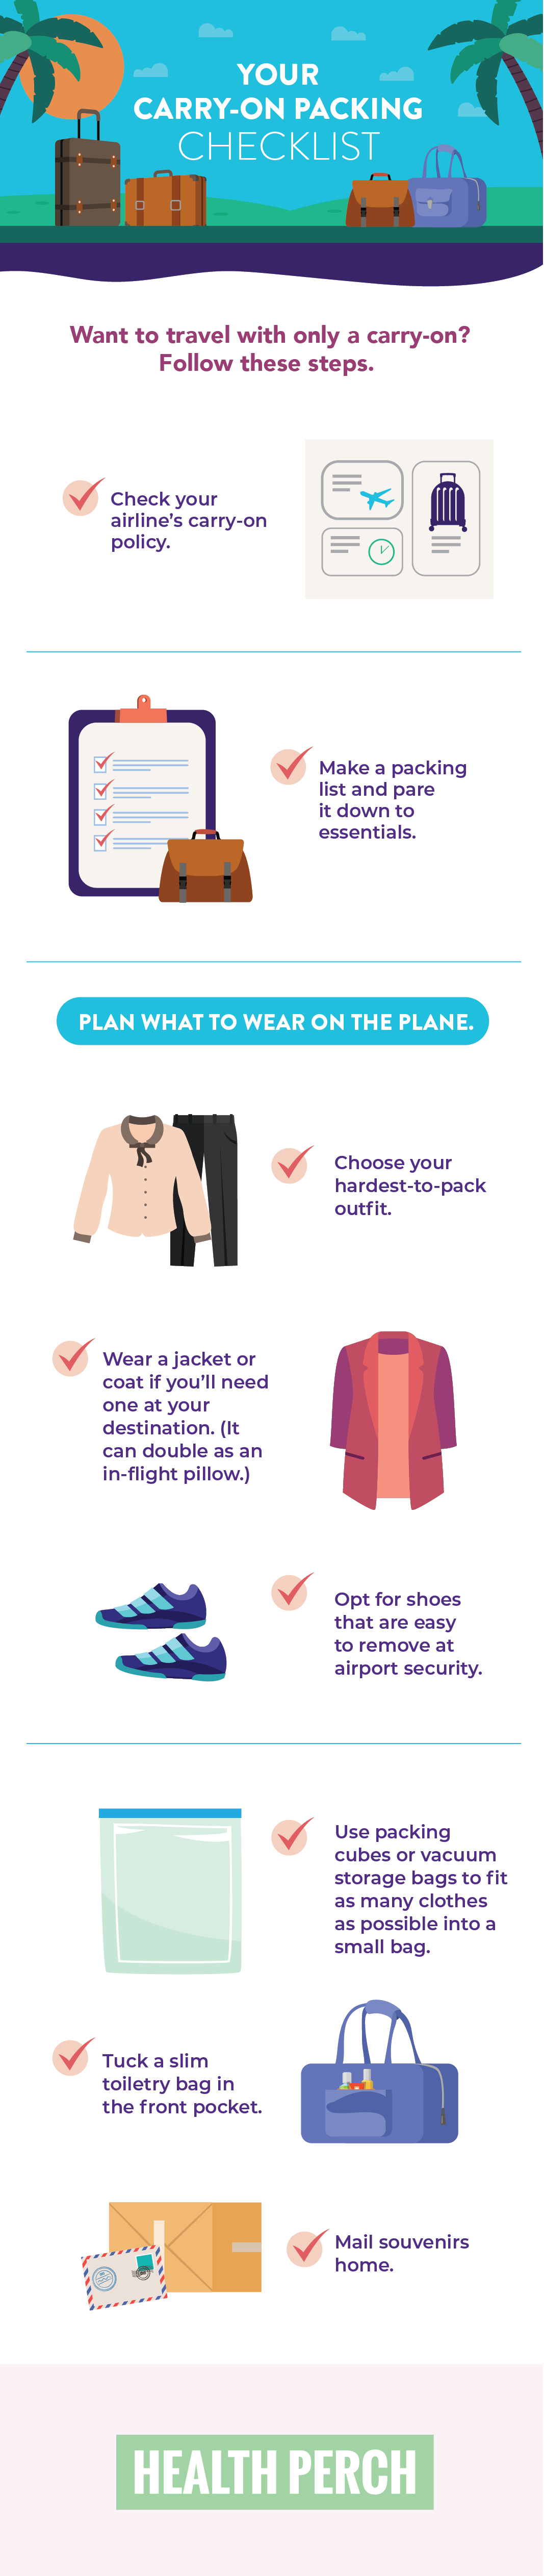 De-Stress Your Next Vacation by Packing the Perfect Carry-On